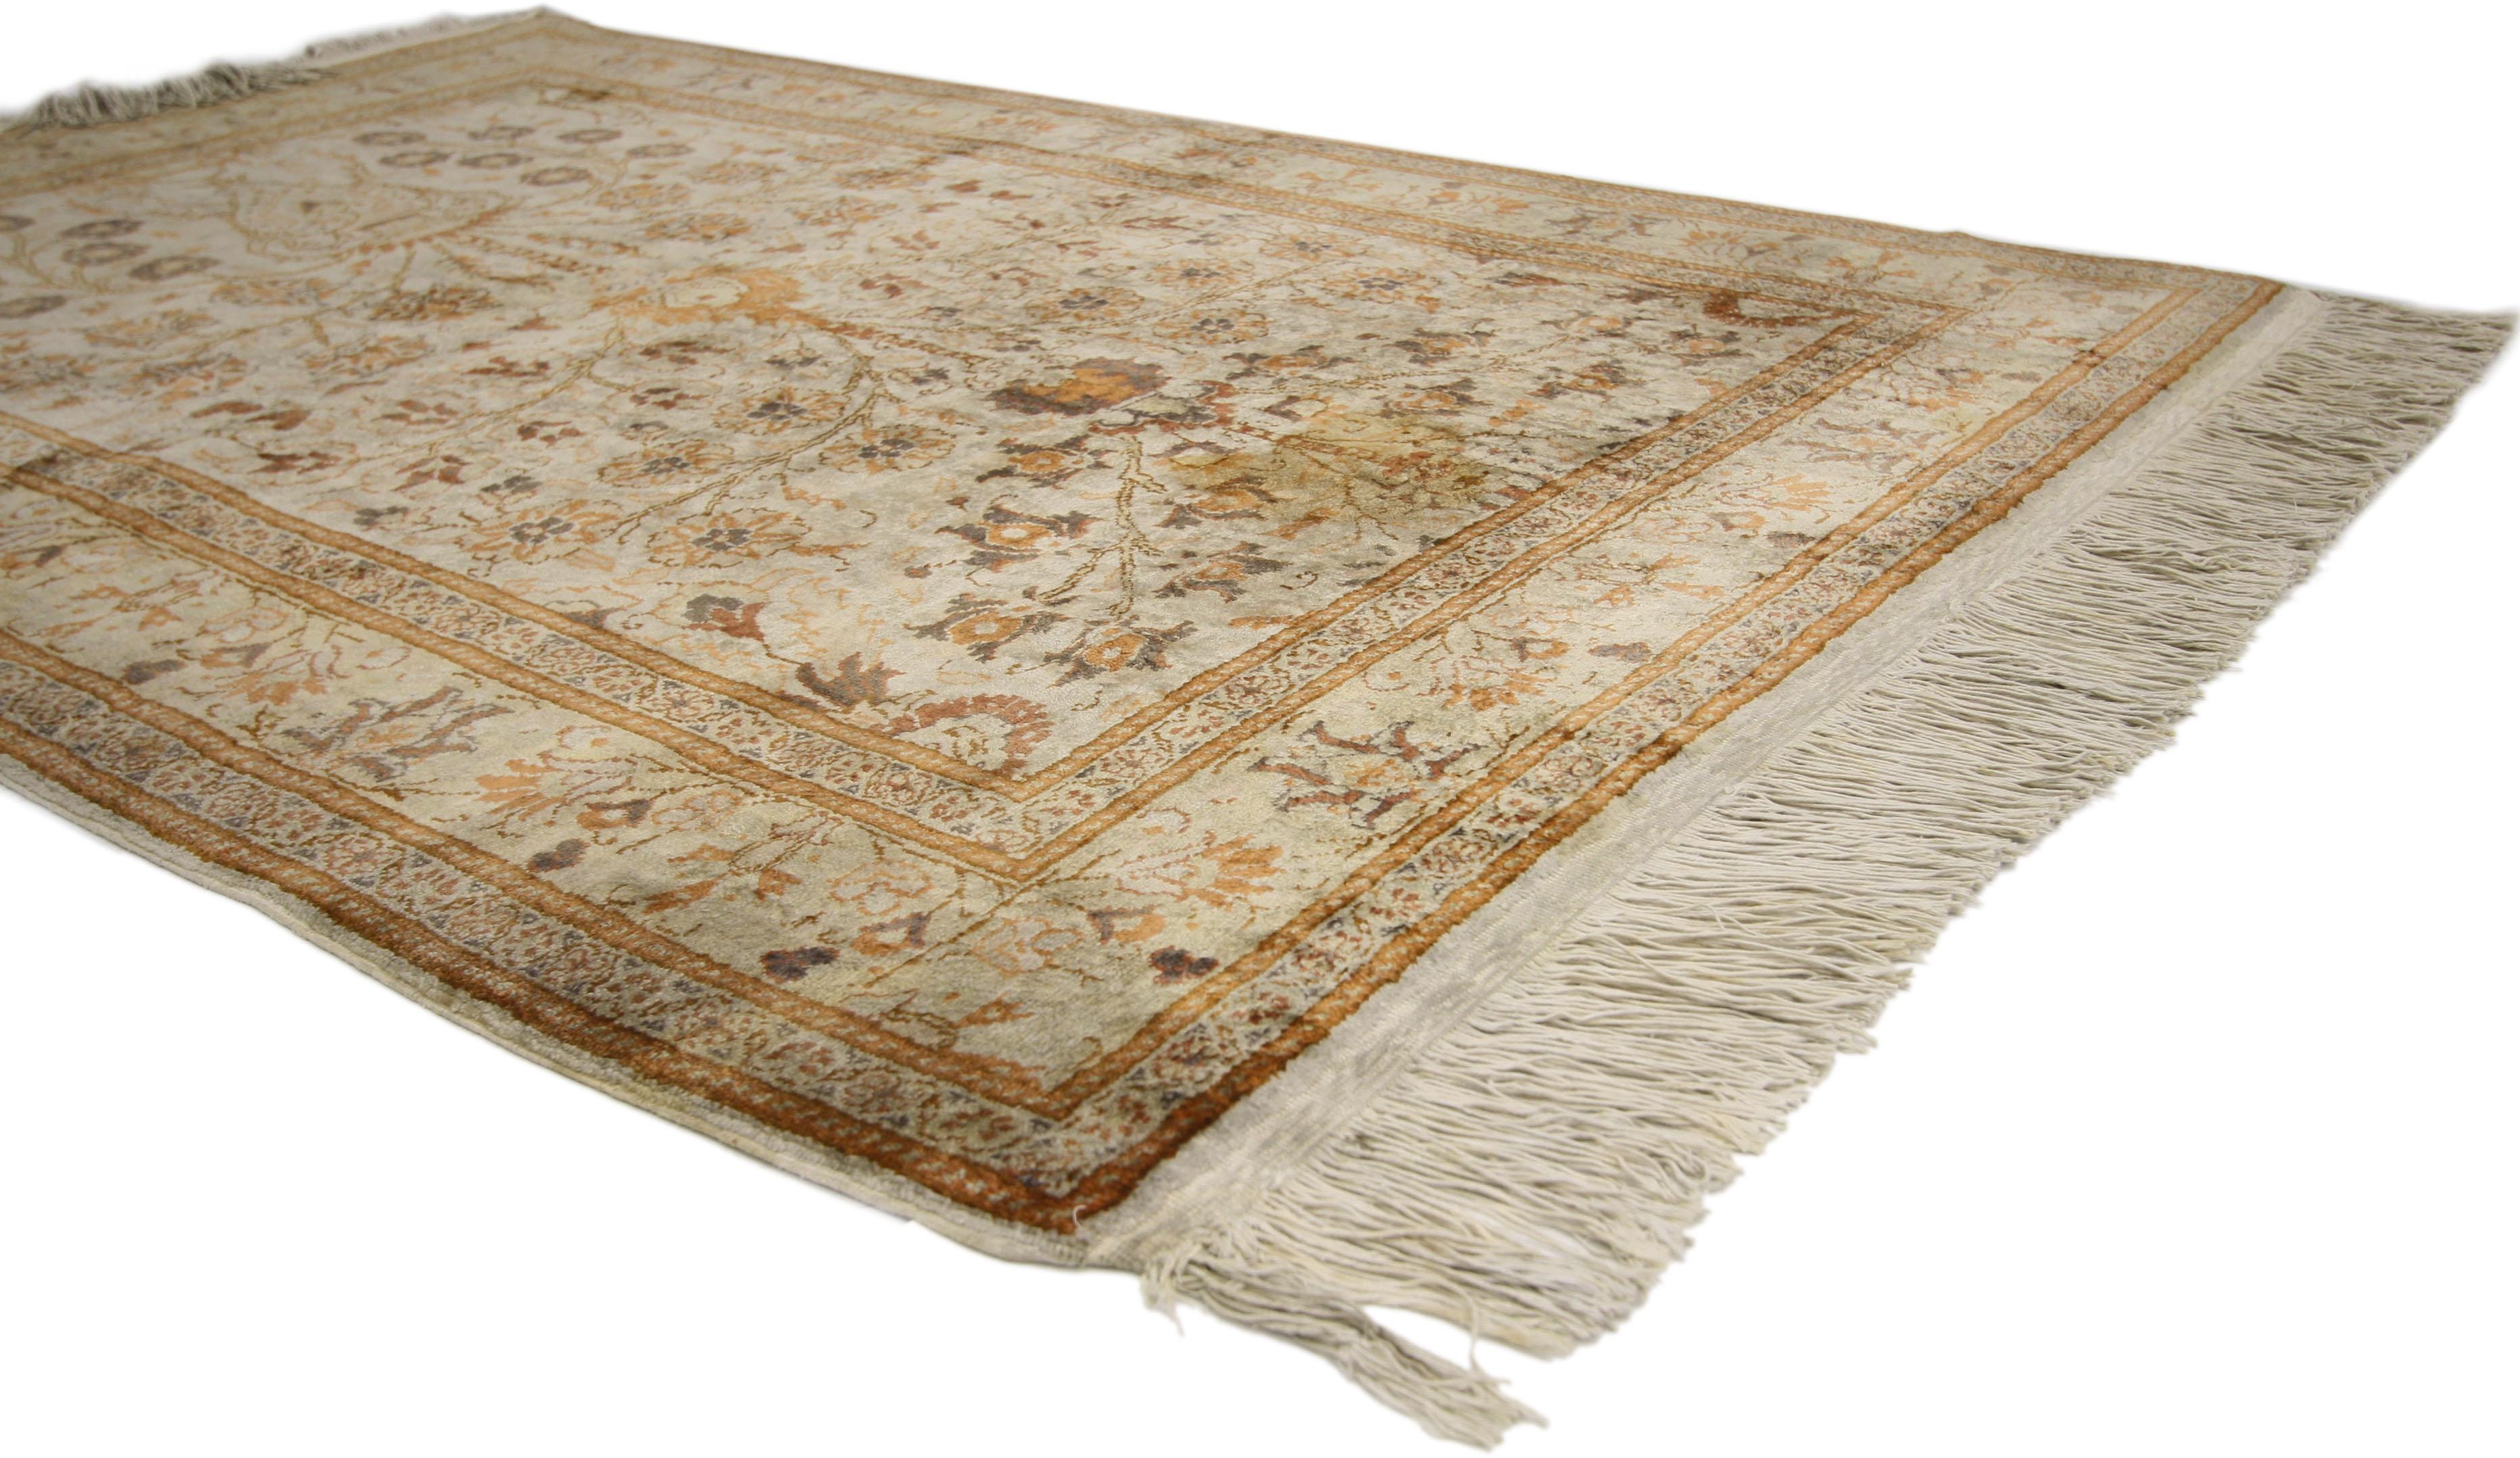 76616 Vintage Turkish Oushak rug with vase design, light colors. This hand knotted cotton vintage Turkish Oushak rug features a directional vase design with a rod sprouting large scale palmettes, flowers and blossoms all-over the creamy-beige field.